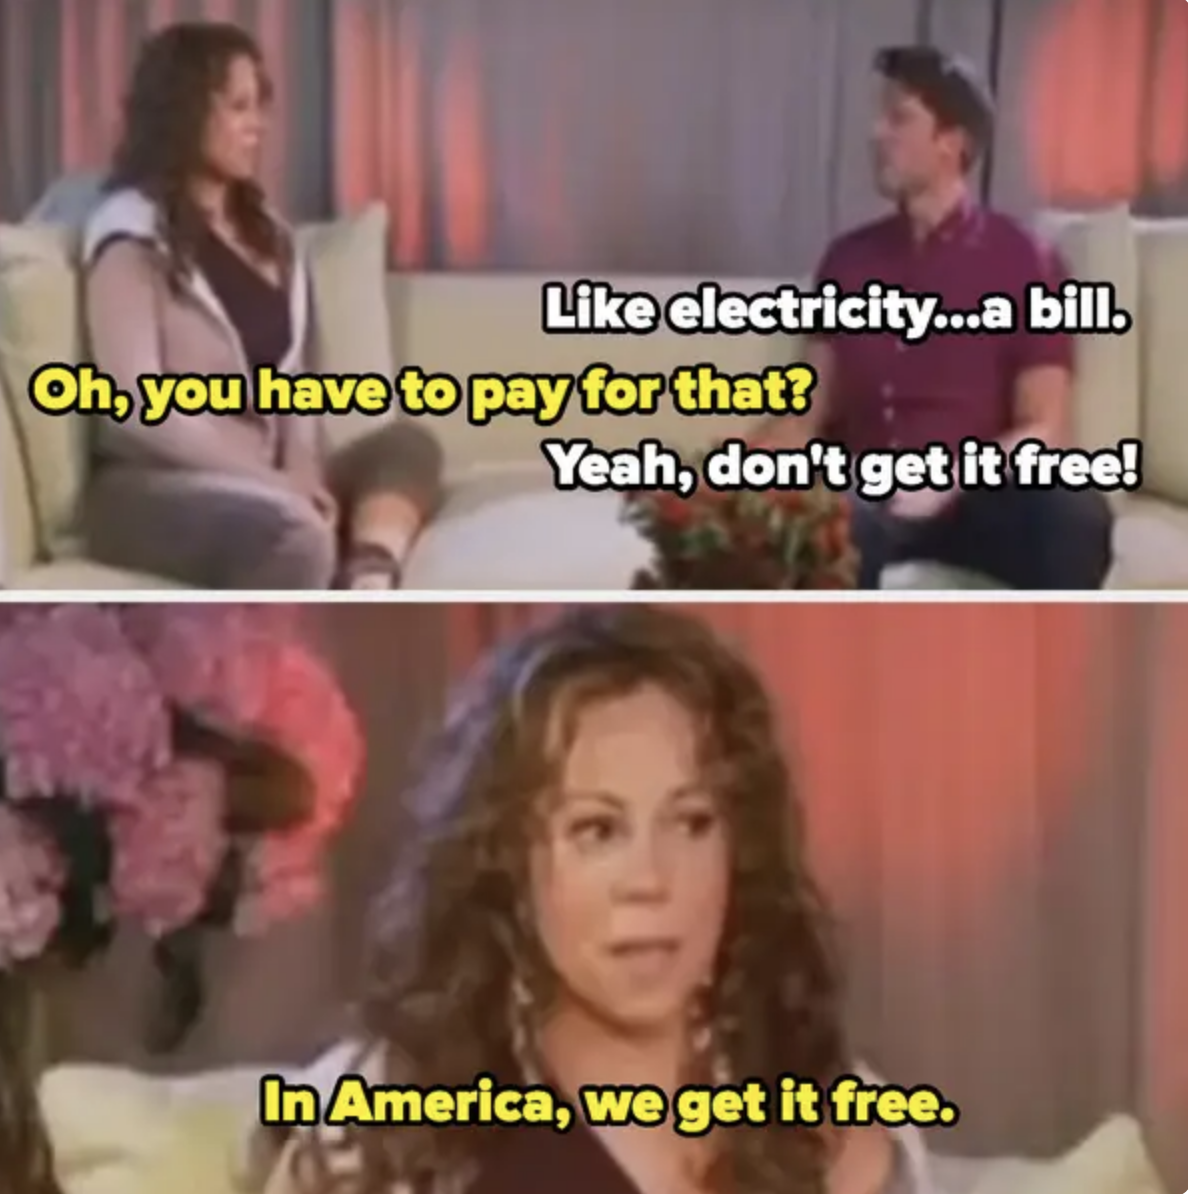 Mariah Carey and an unidentified man have a conversation. Mariah says, &quot;In America, we get it free.&quot; in response to a discussion about paying for electricity